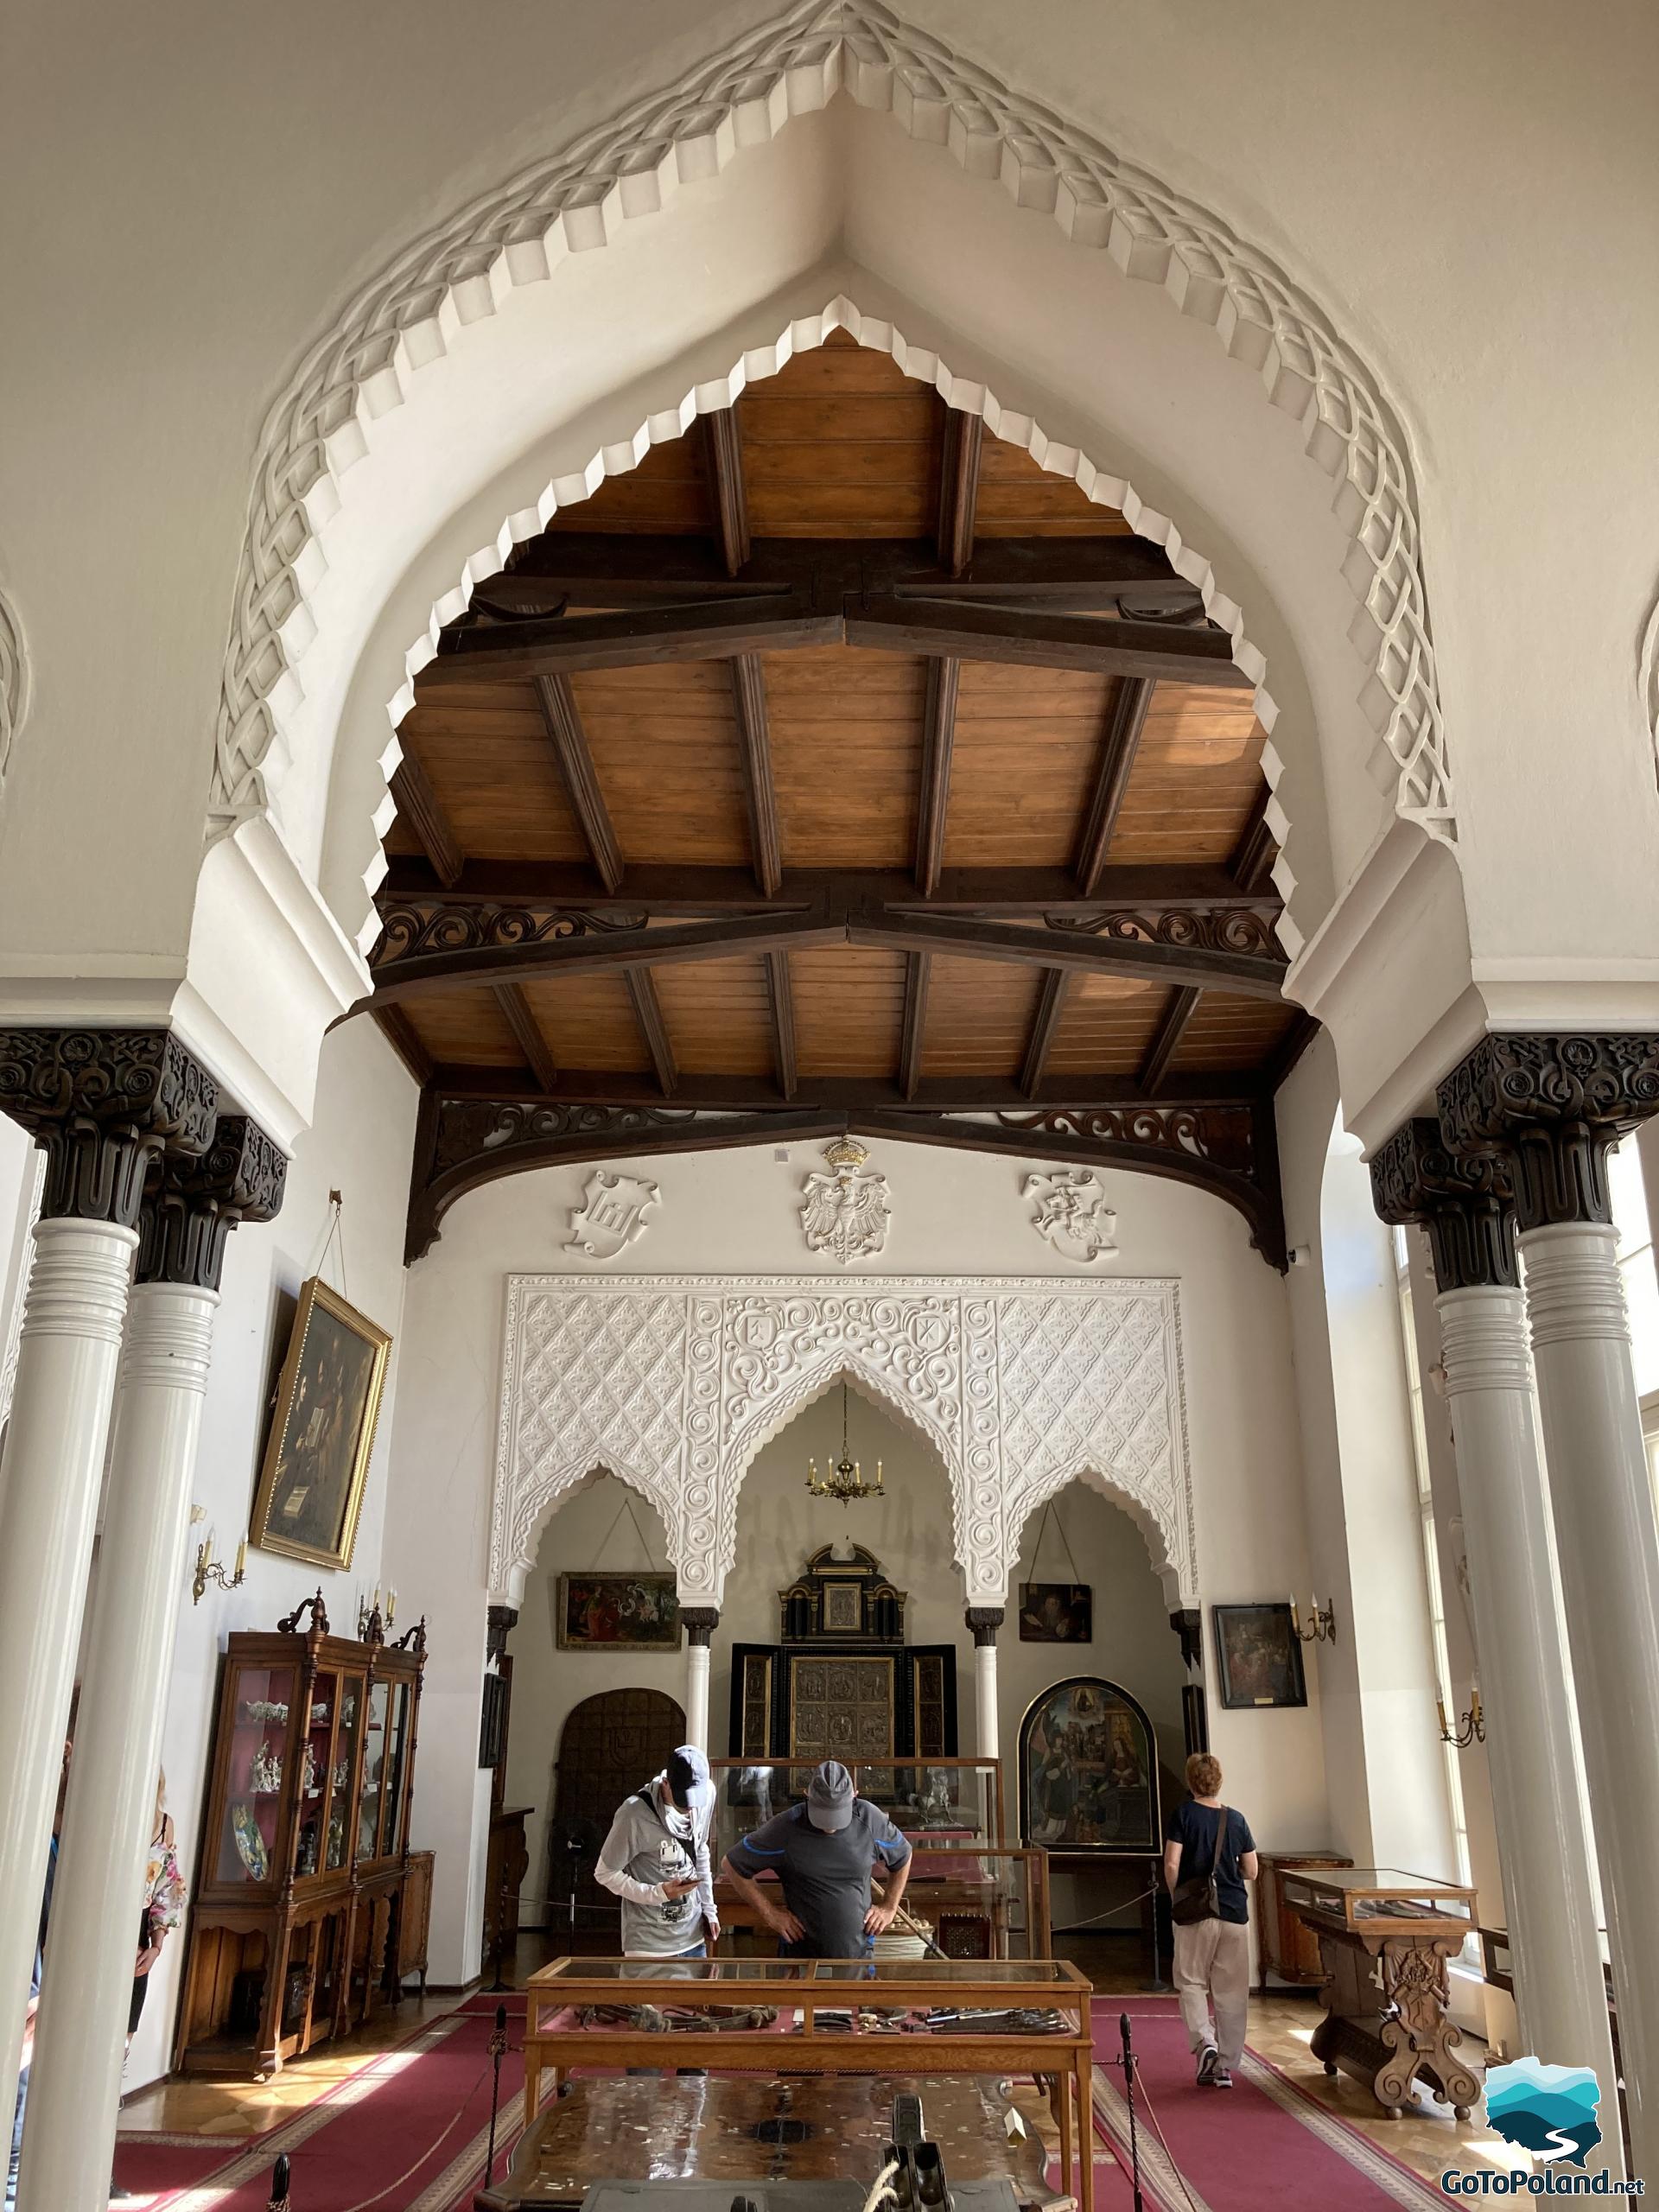 a room in the Moorish style, shelves with porcelain, three tourists viewing the exhibitions